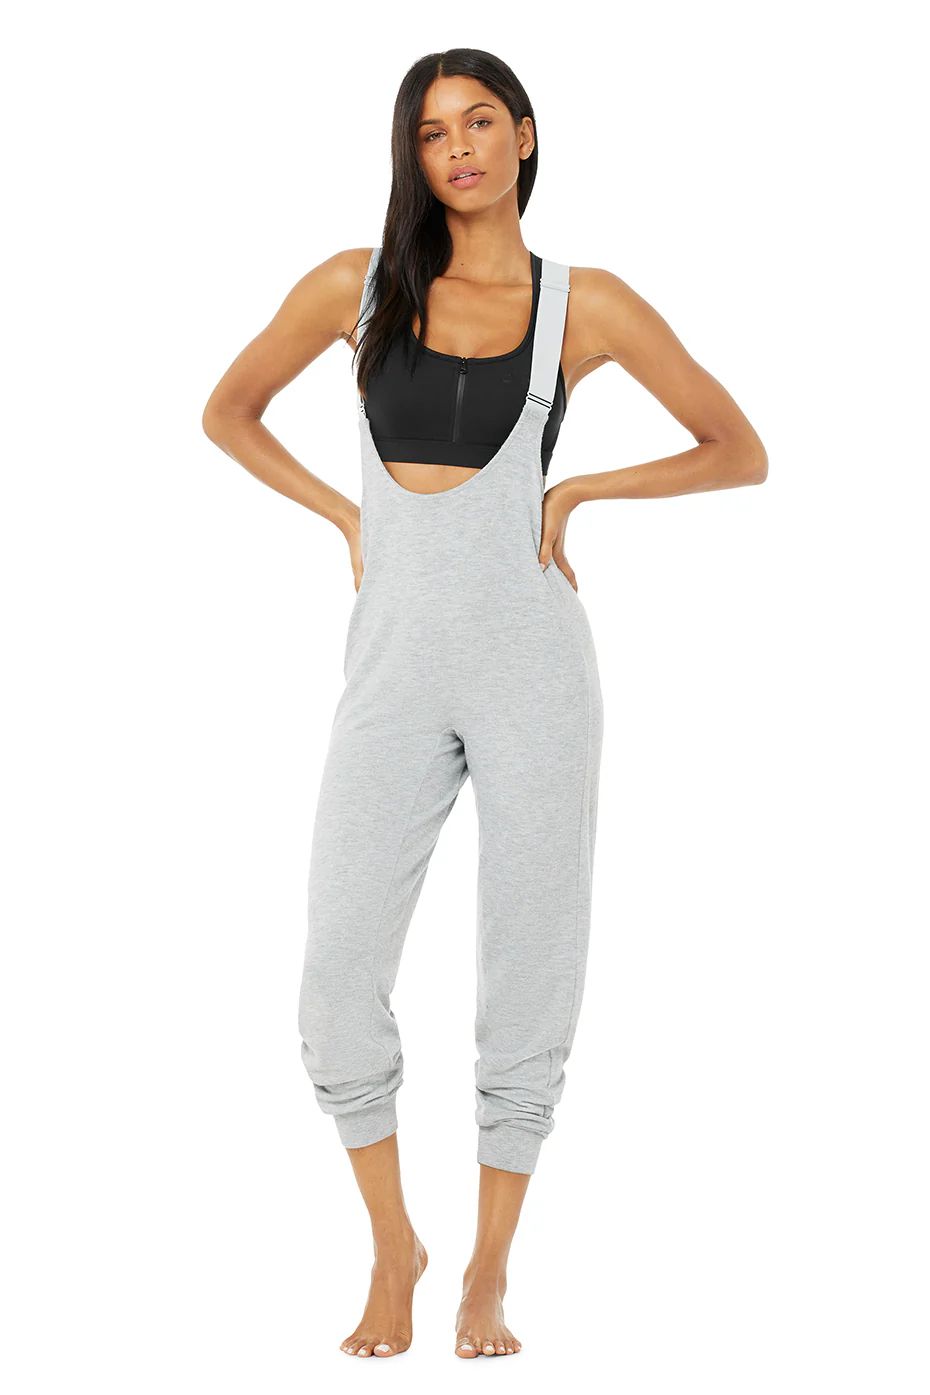 Alo YogaÂ® | Layback Jumpsuit Top in Athletic Heather Grey, Size: 2XS | Alo Yoga